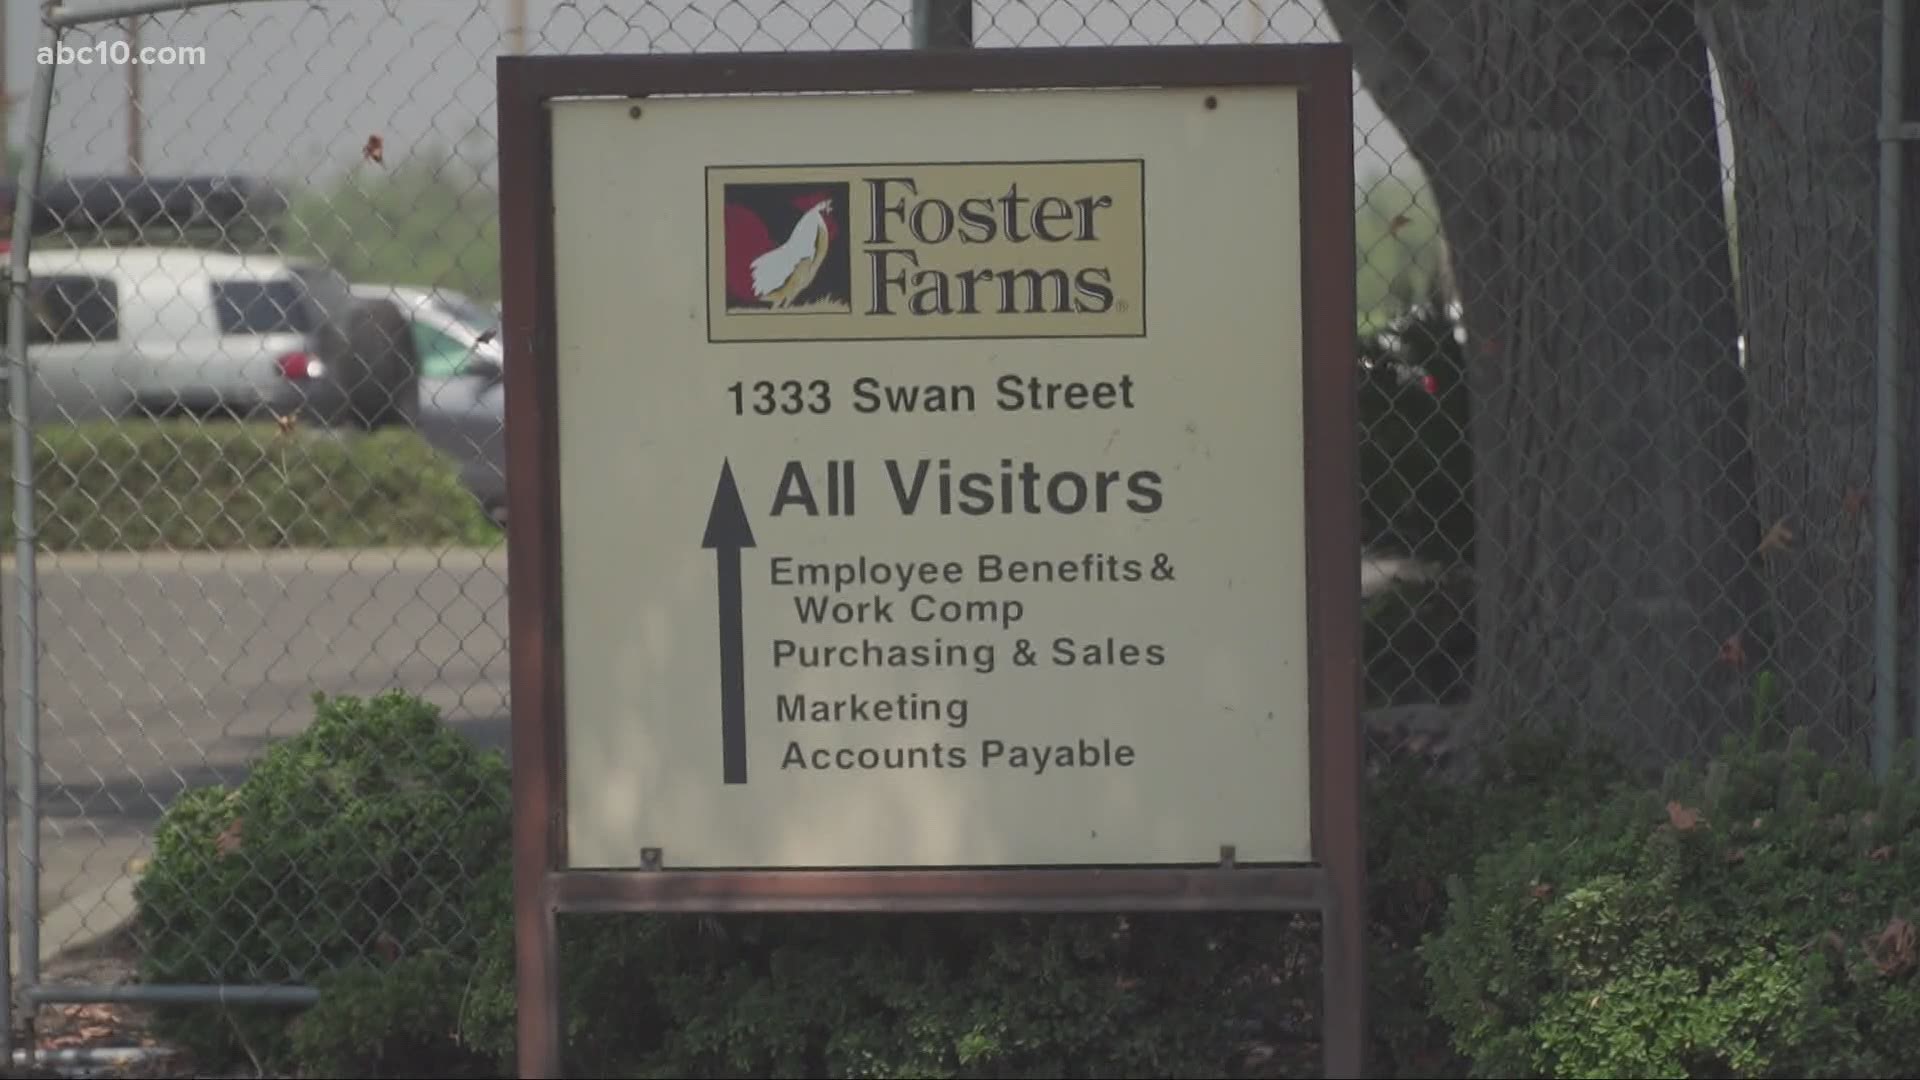 Foster Farms Livingston Facility was ordered to shut down after 358 employees tested positive, and eight employees died due to the coronavirus.